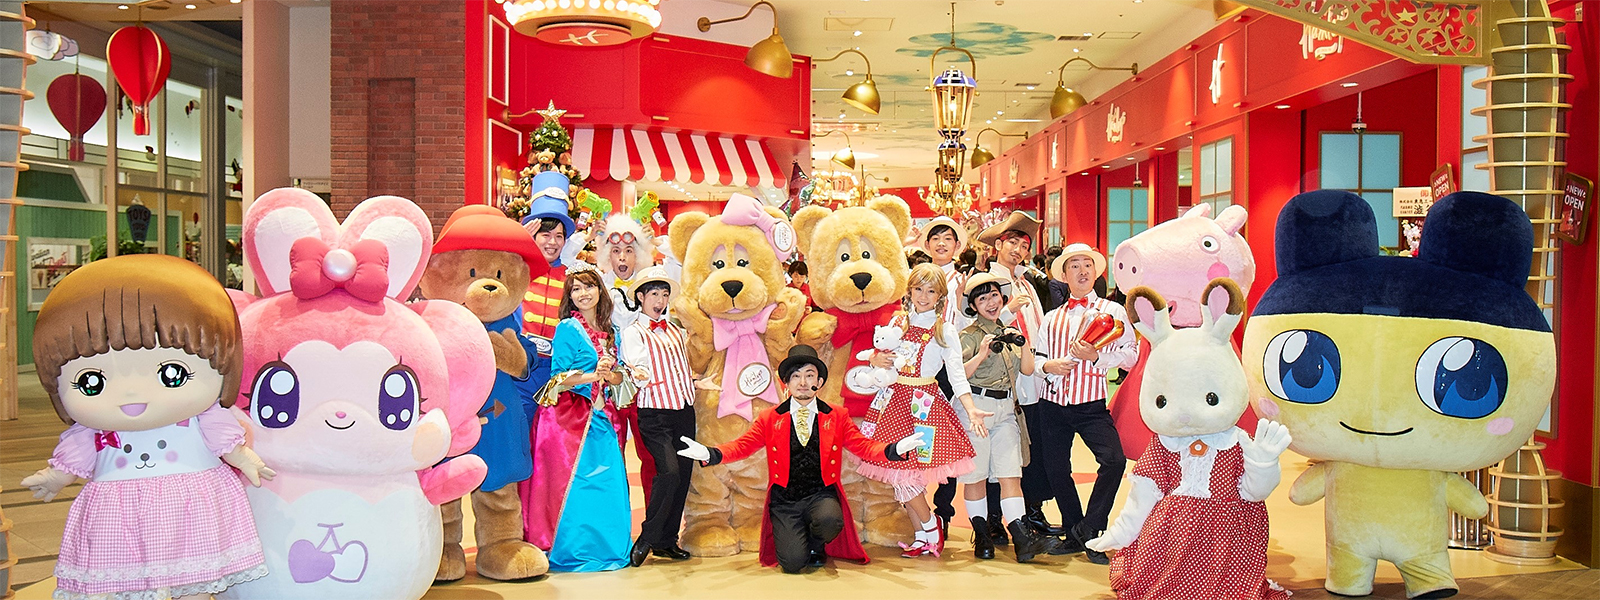 World’s oldest toy retailer opens for business in East Asia